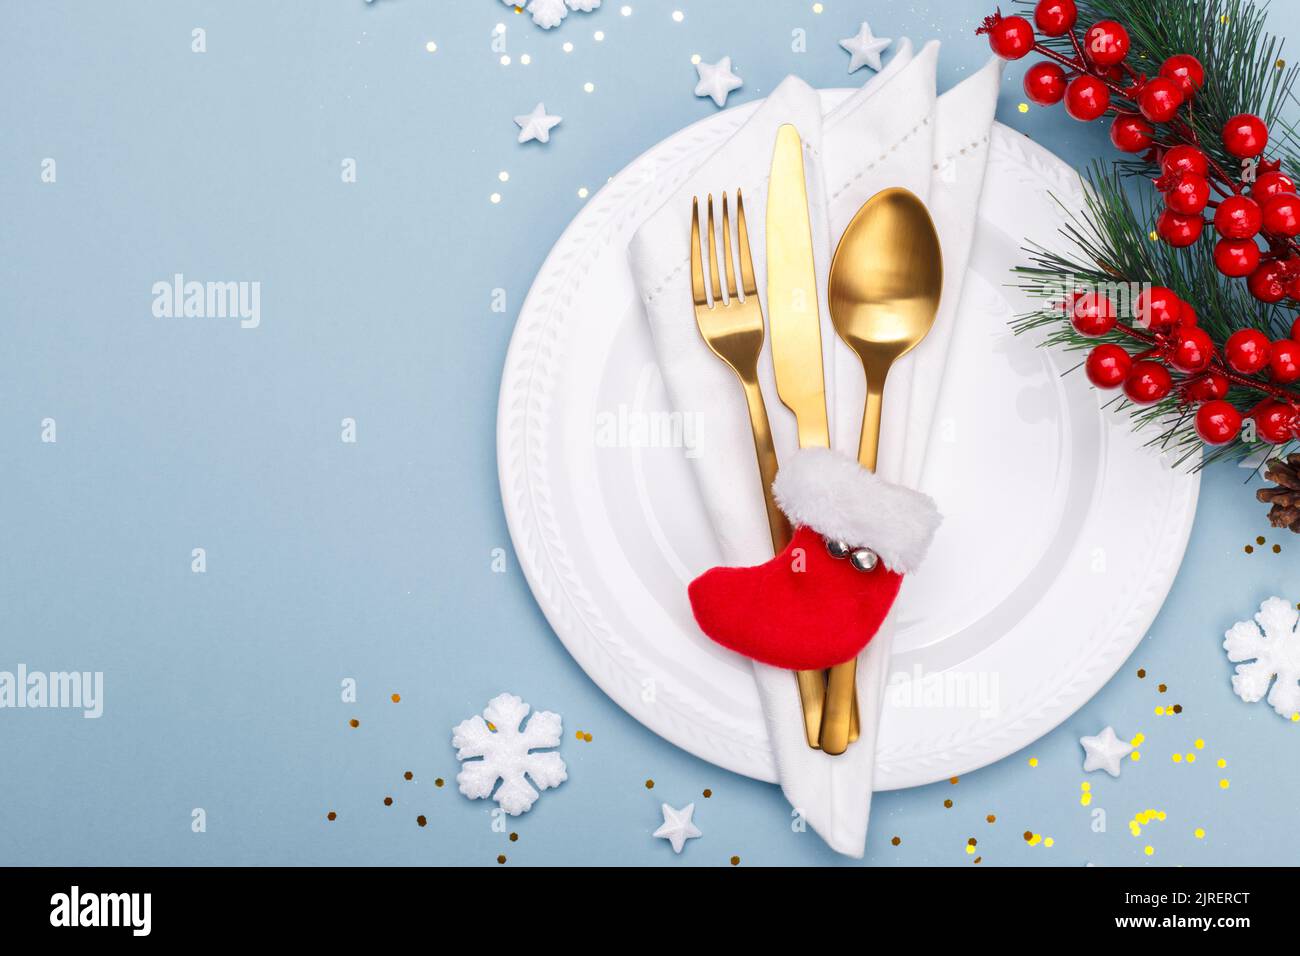 Christmas or new year table setting with golden cutlery on the blue background with copy space Stock Photo